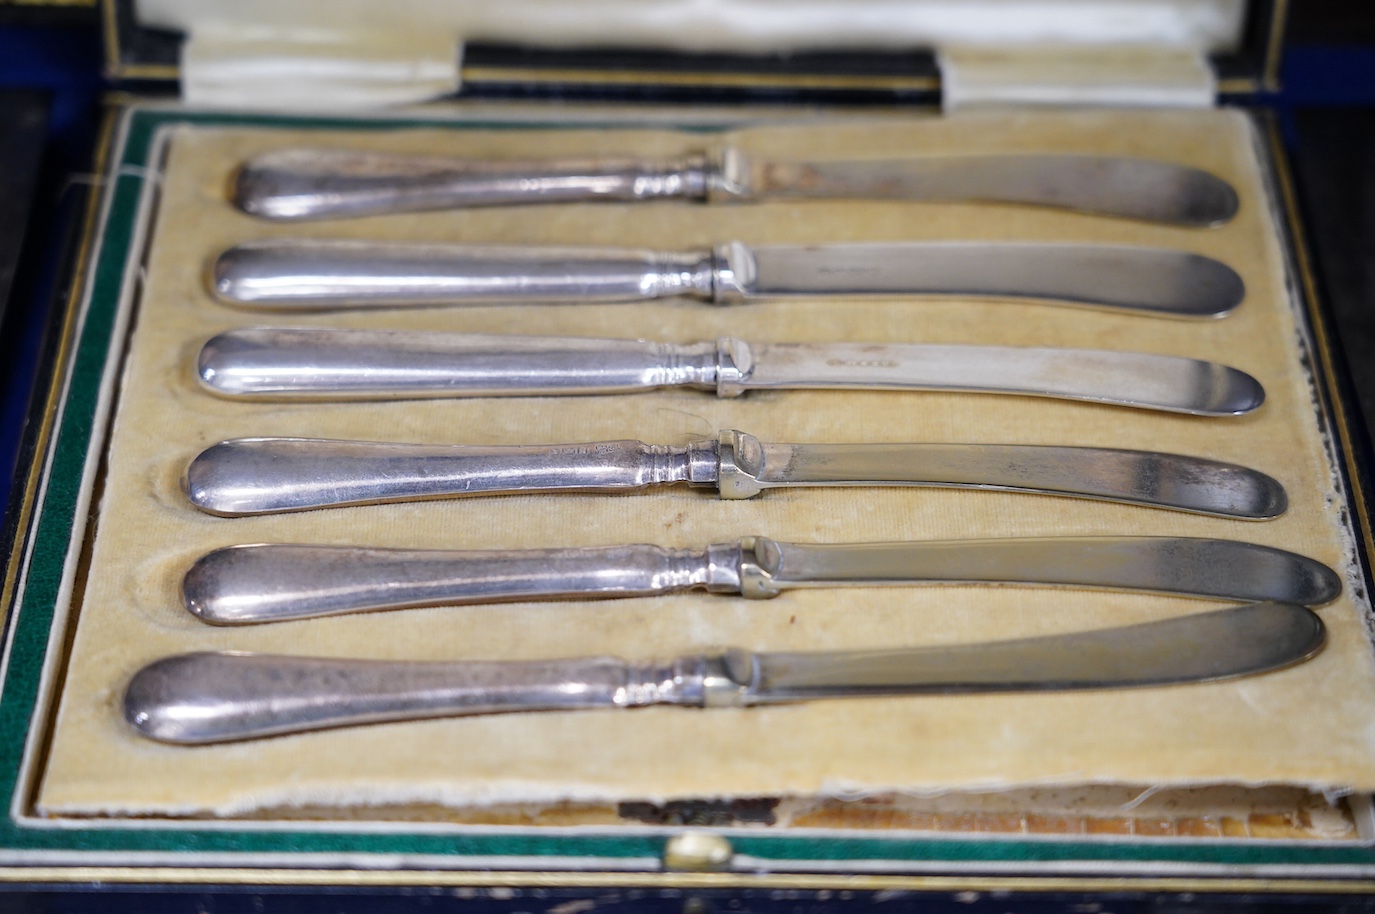 A cased set of six silver handled tea knives and six other cased plated sets. Condition - fair